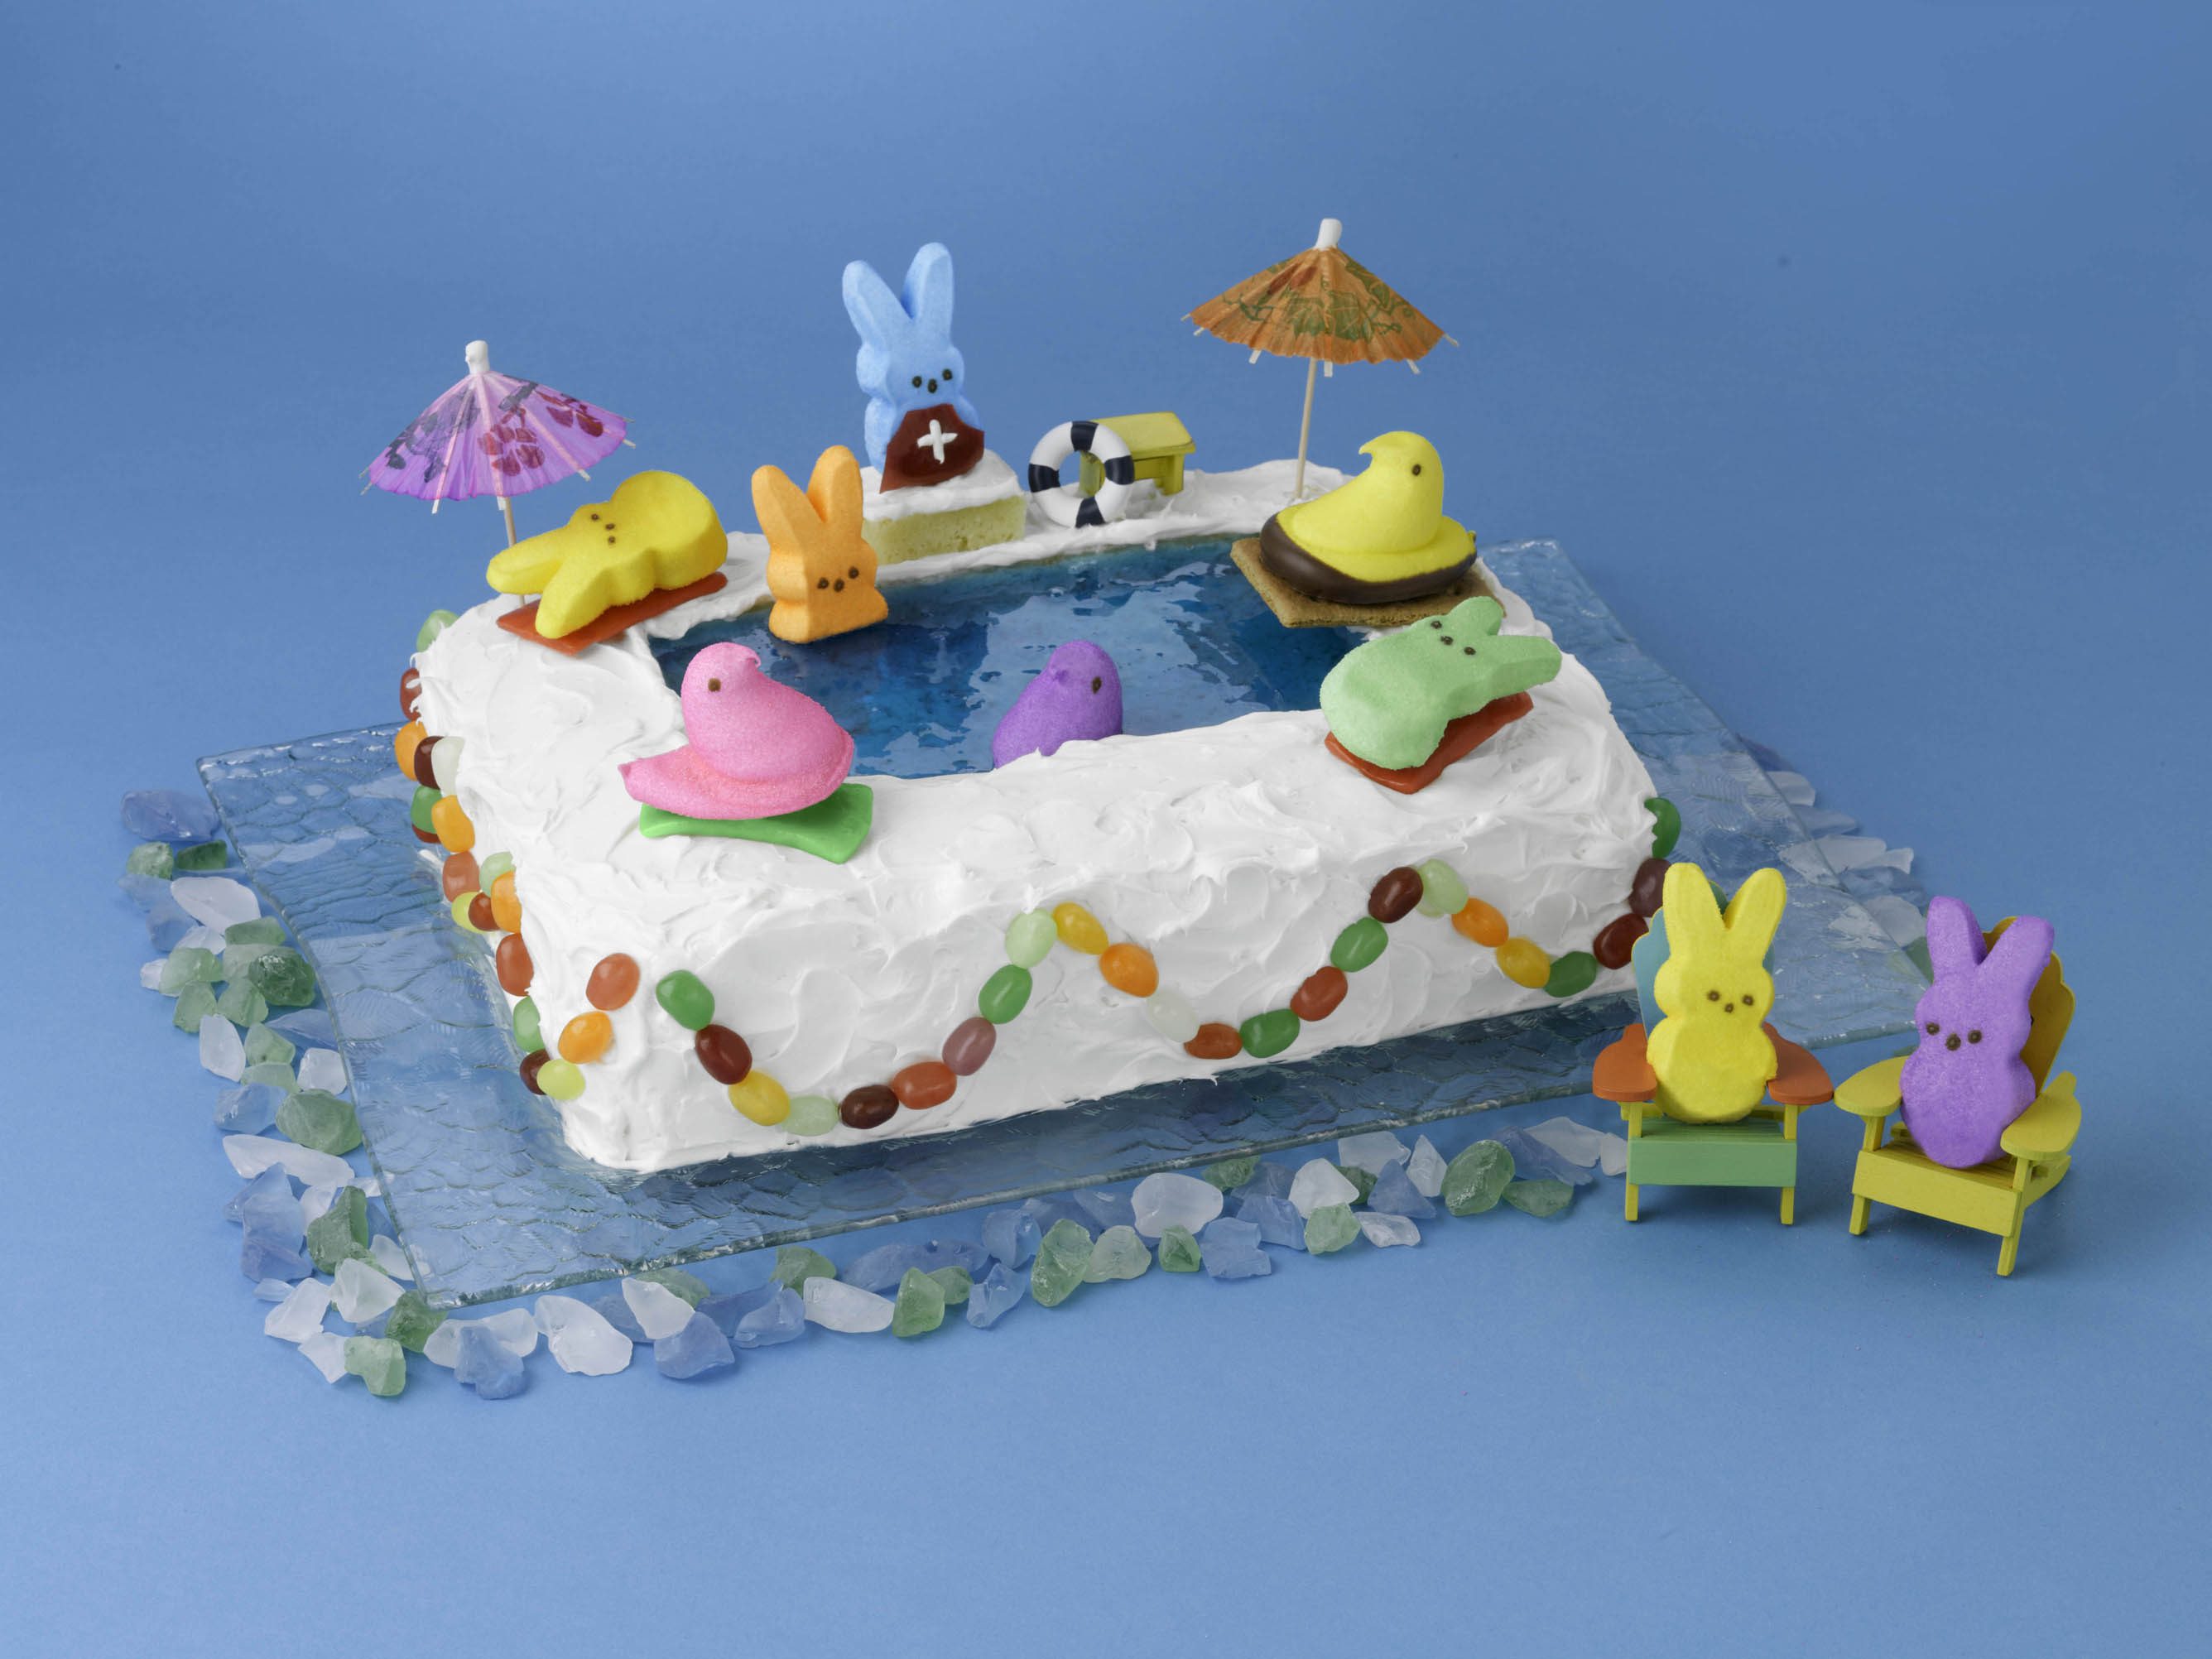 pass the peas, please: pool party cake